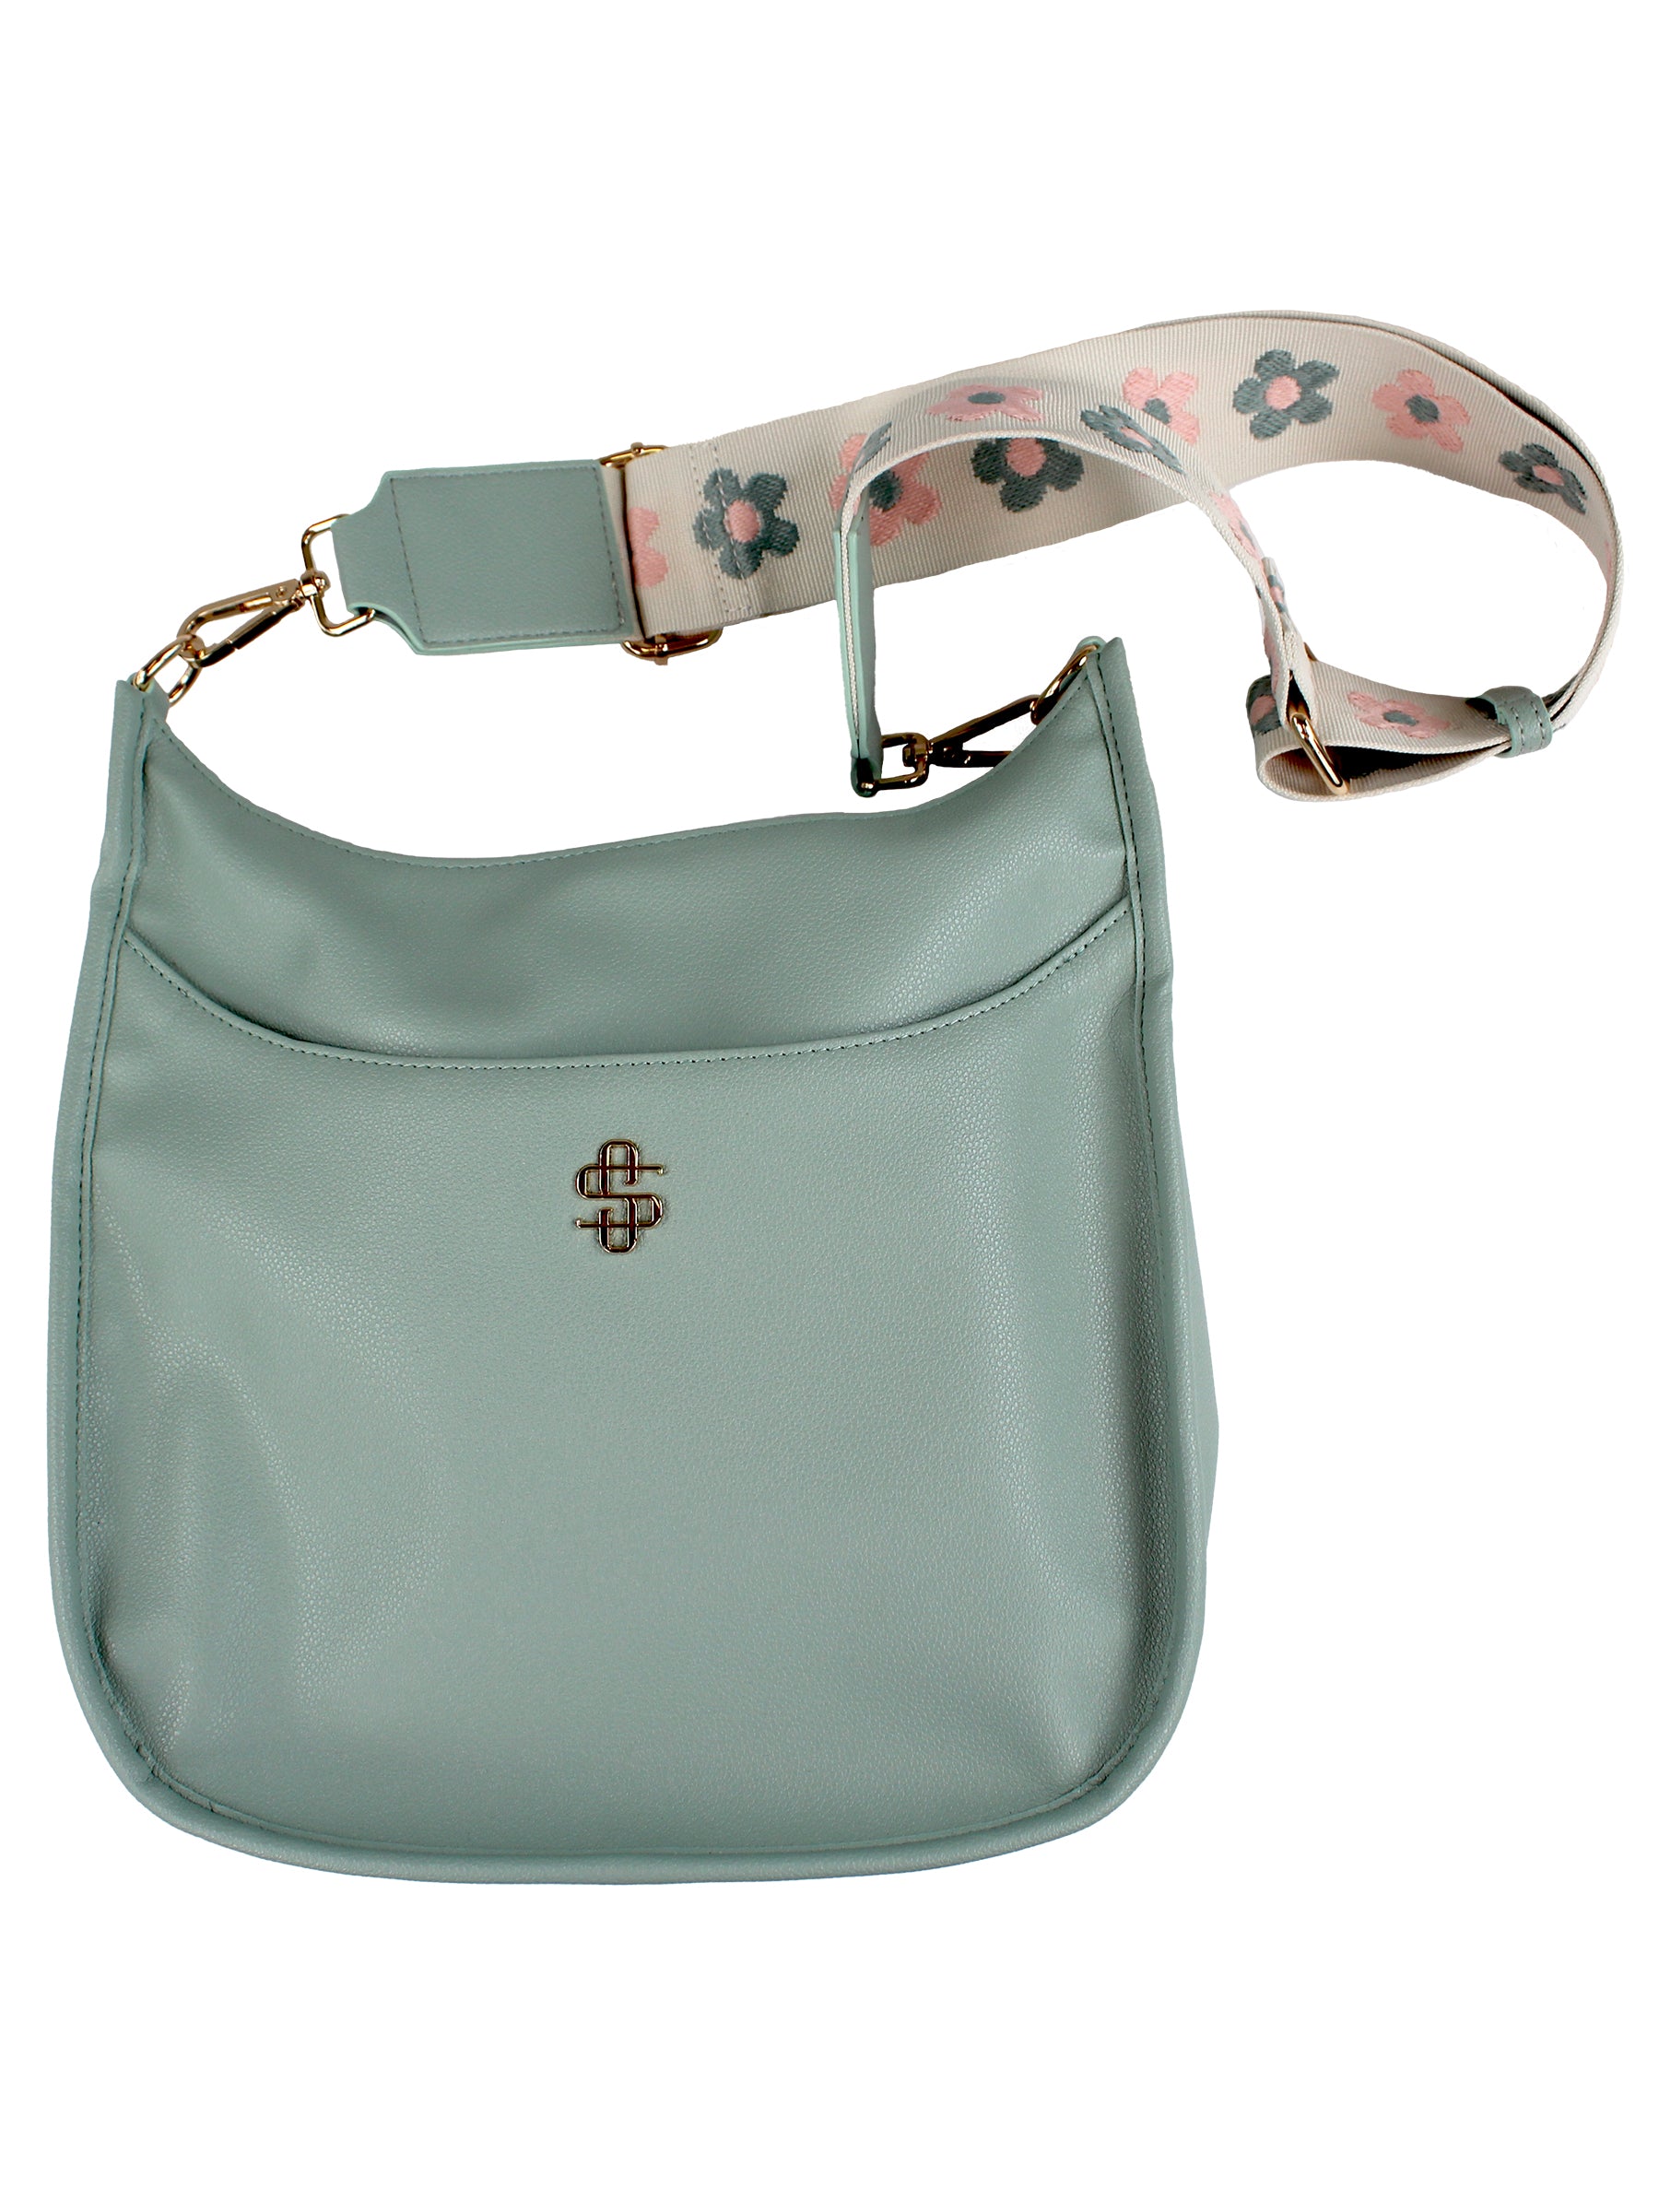 Vegan Leather Lock Satchels by Simply Southern